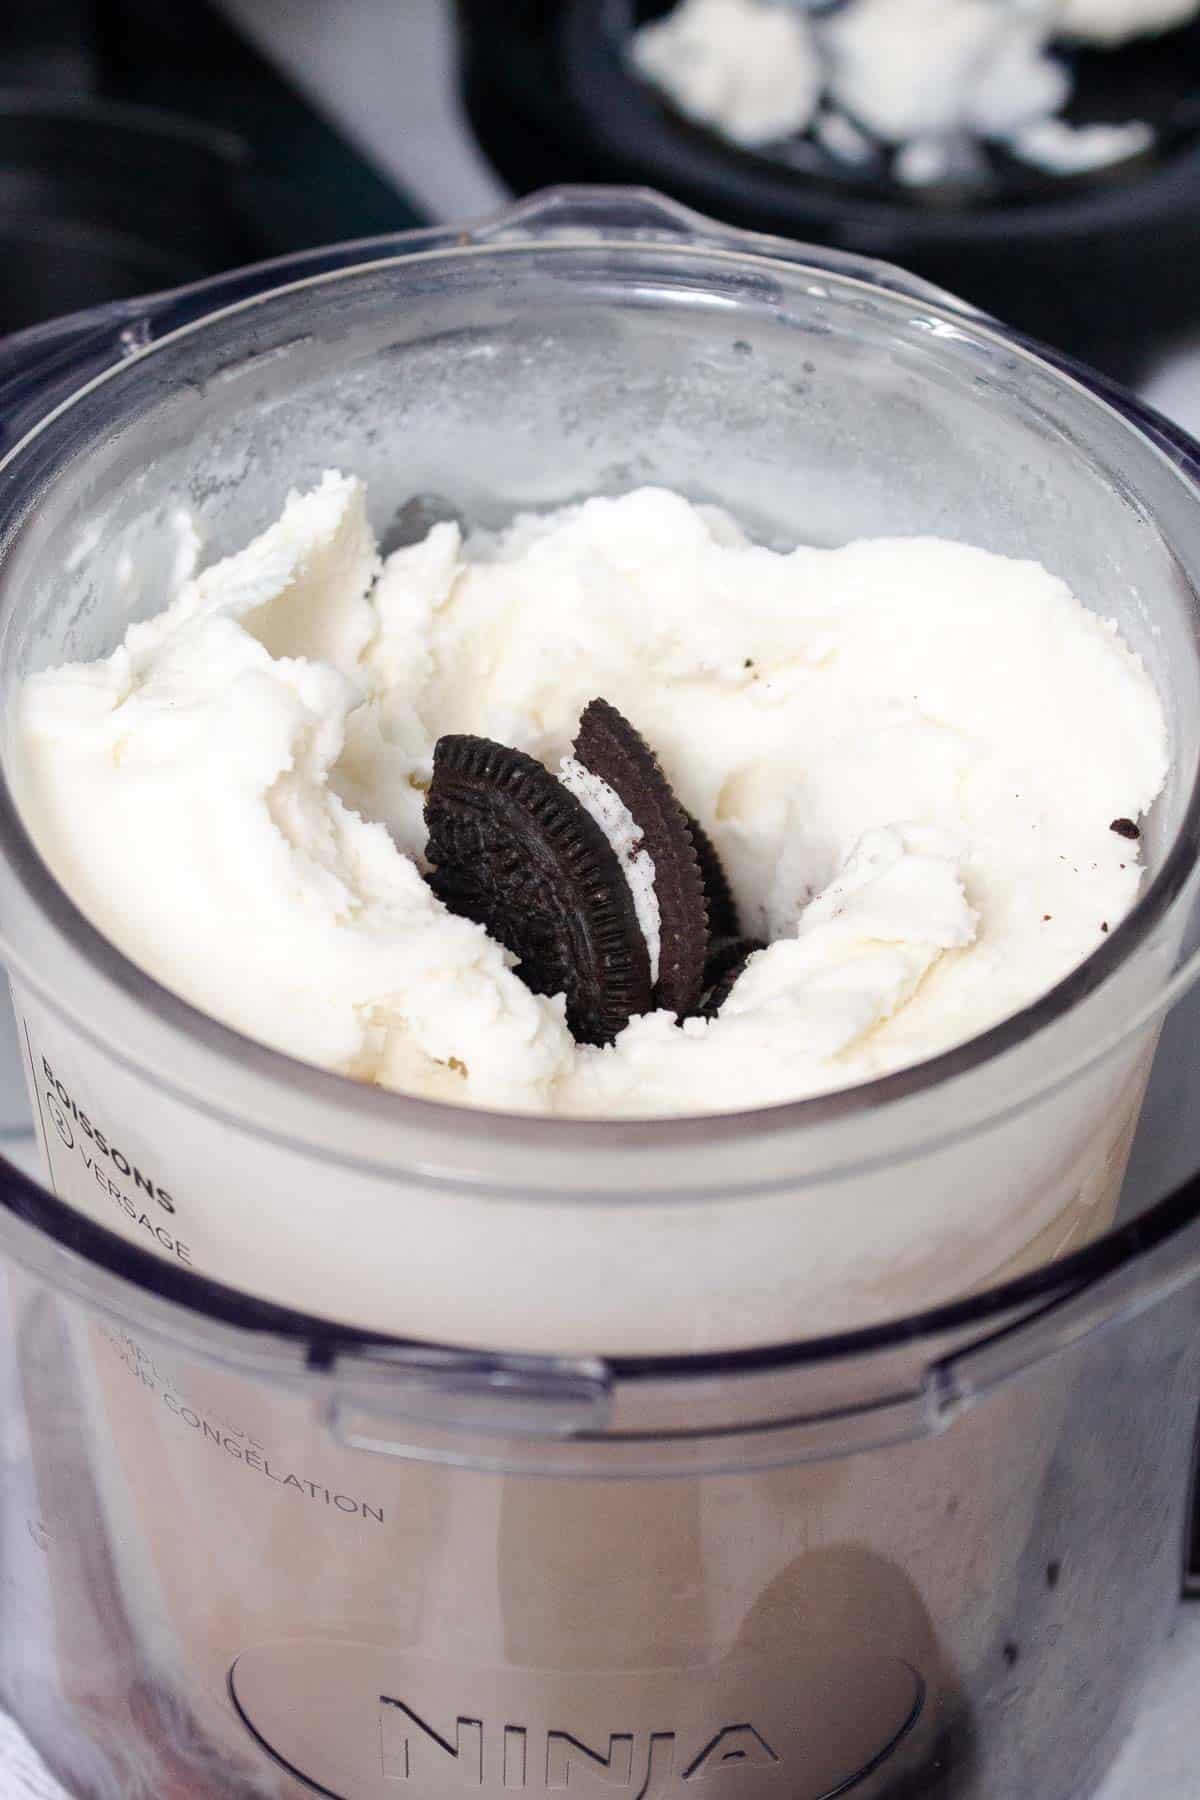 Halved oreos are inserted into the hole in the center of the vanilla ice cream pint.